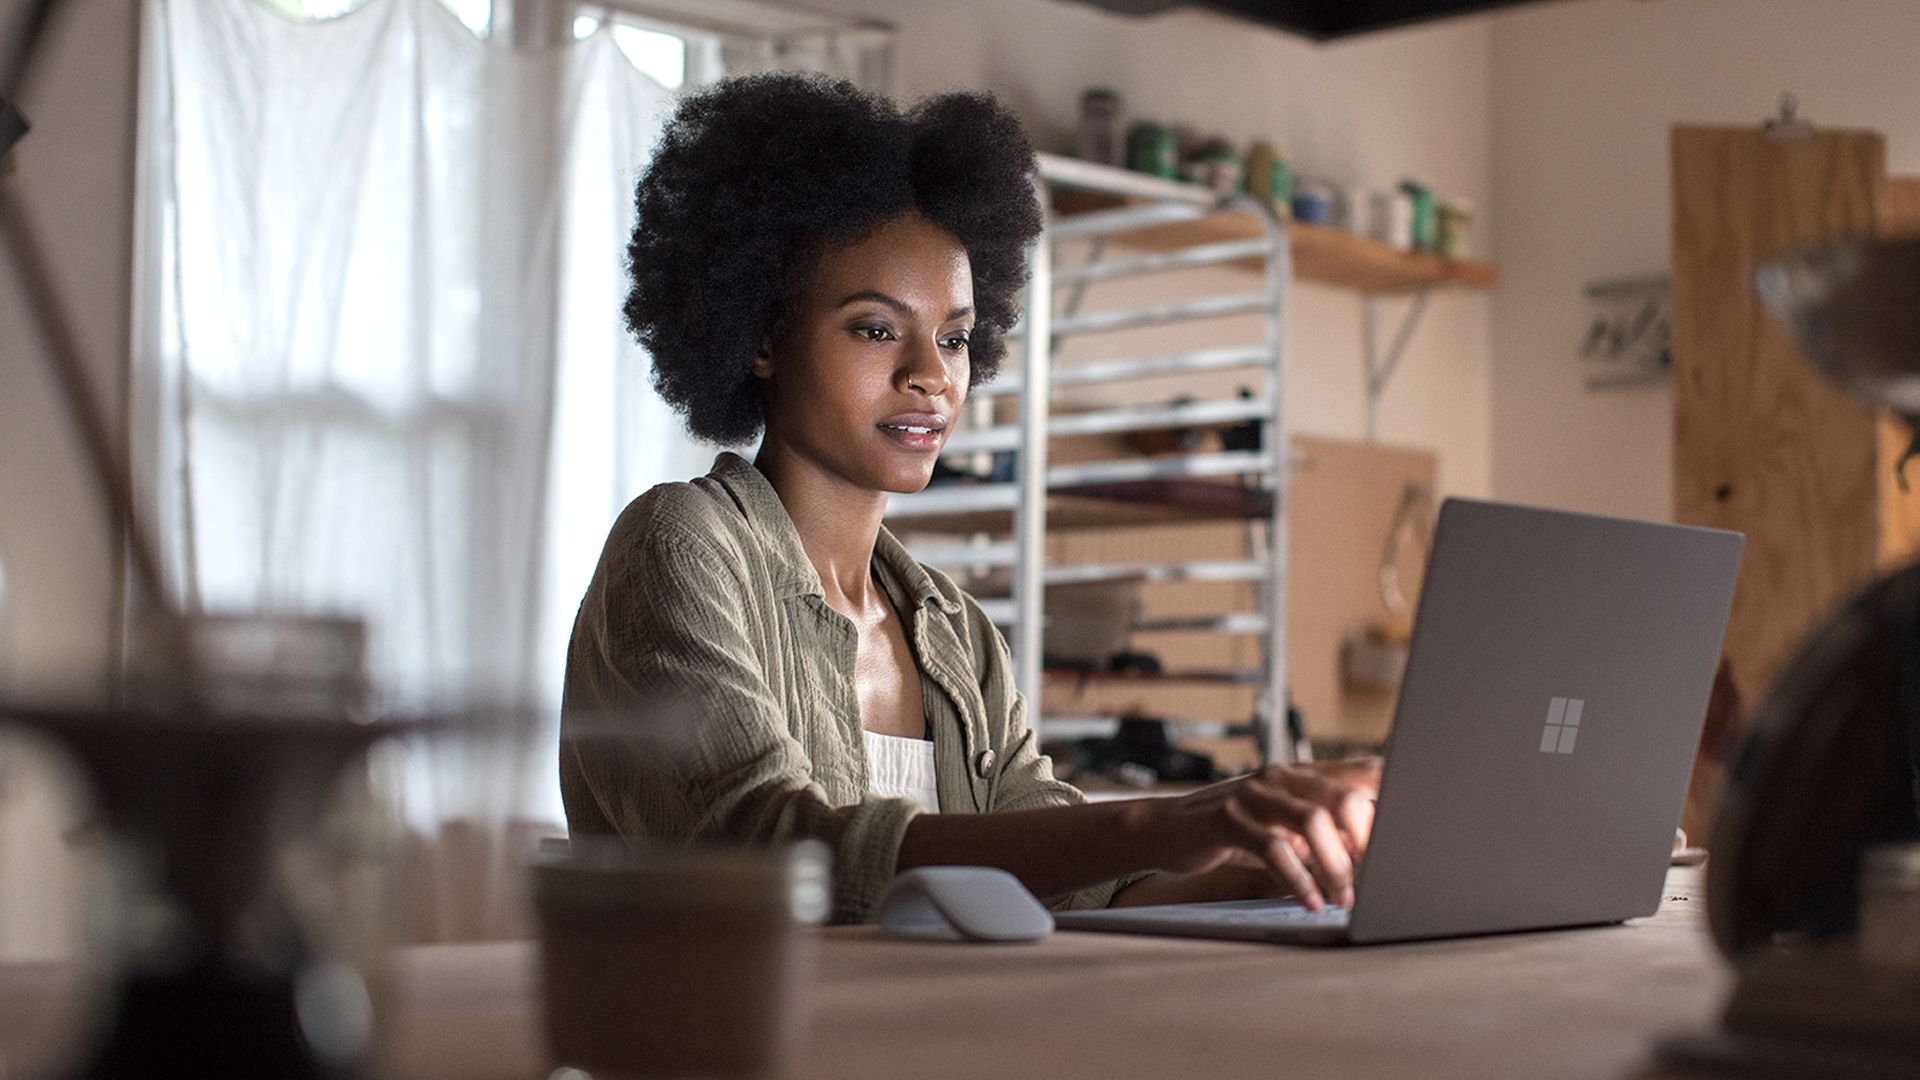 African American woman sitting in front of a laptop pointing at the screen